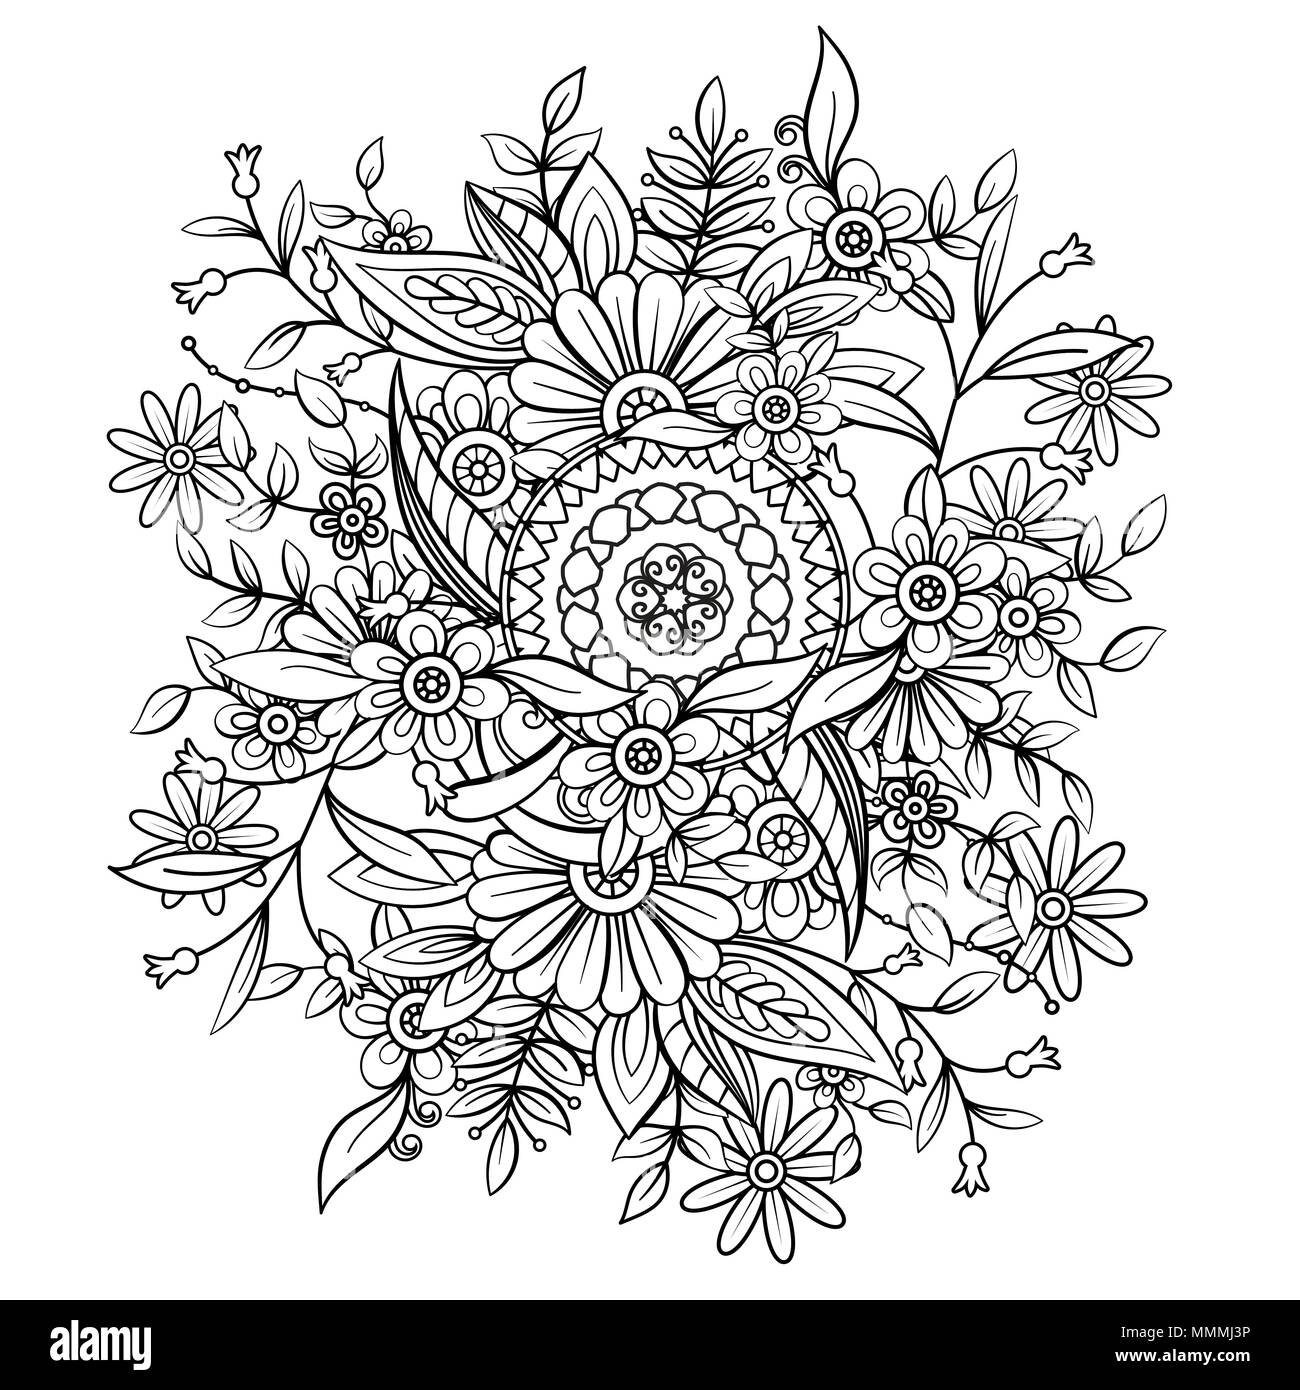 Adult coloring book page hi